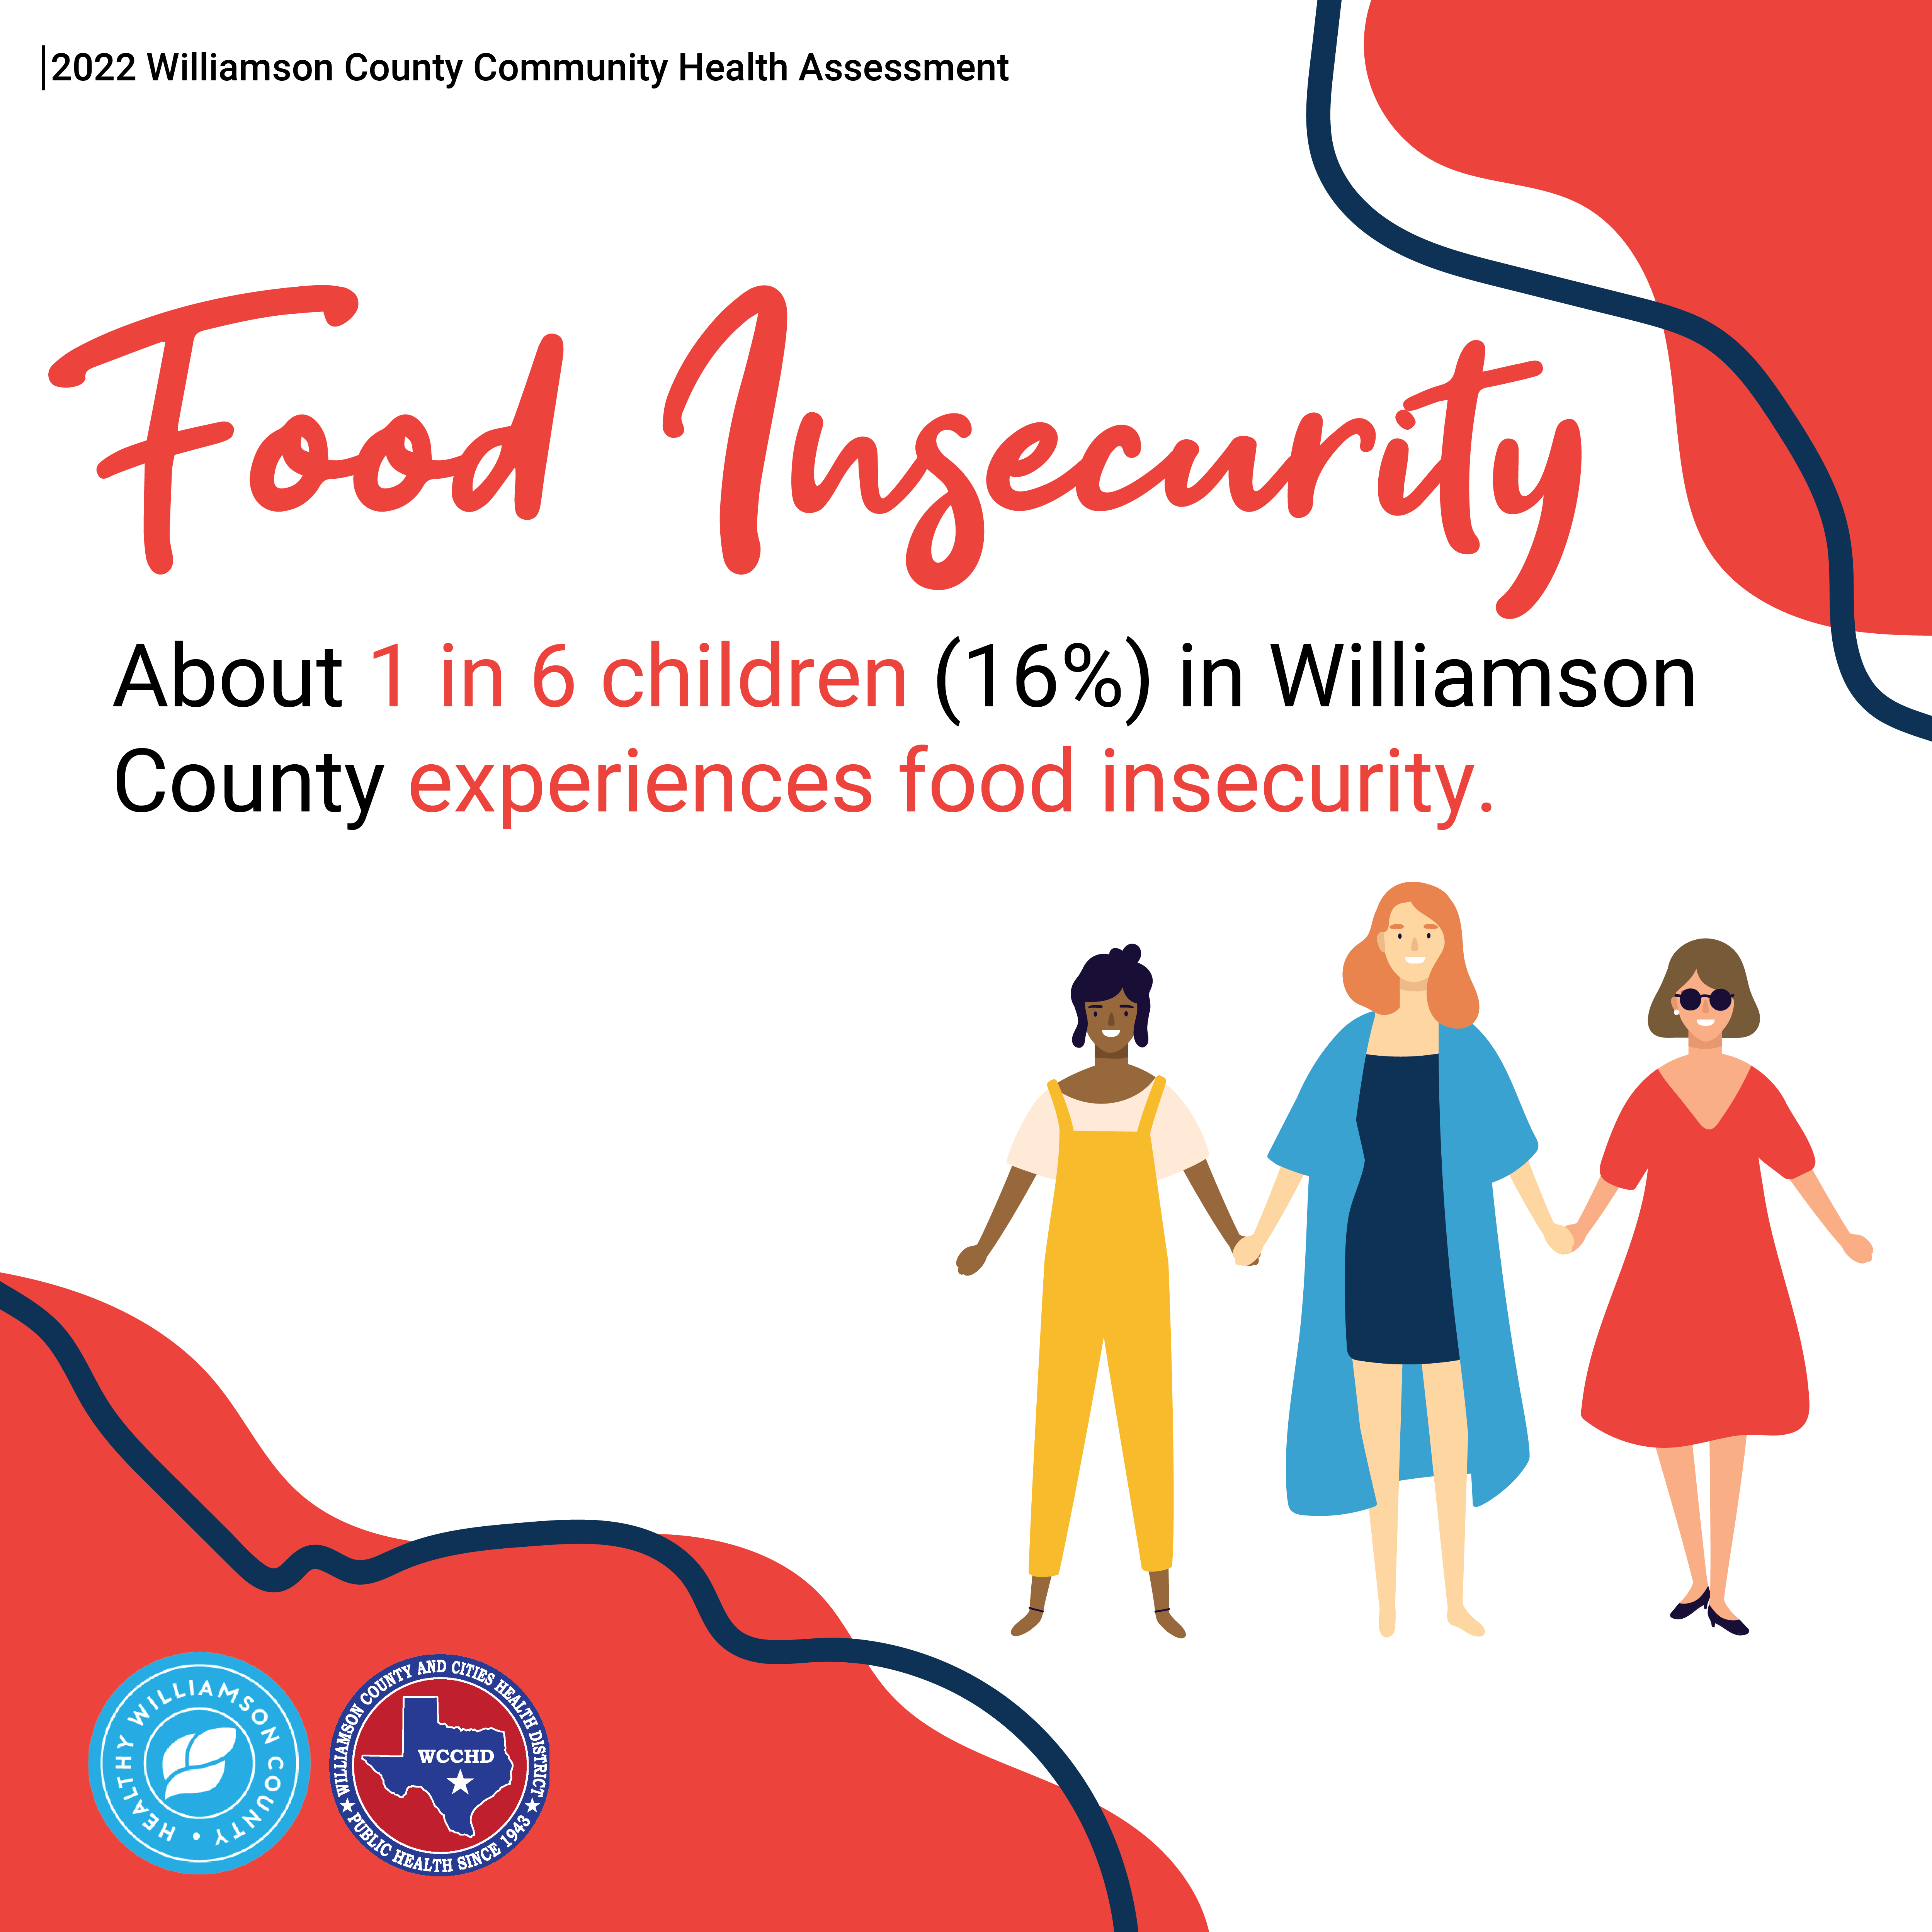 2022 Williamson County Community Health Assessment. Food Insecurity. About 1 in 6 children (16%) in Williamson County experiences food insecurity. Below, three illustrated people holding hands and smiling. Blobs and squiggly lines in bottom left and top right corners. Logos of Healthy Williamson County and Williamson County and Cities Health District.